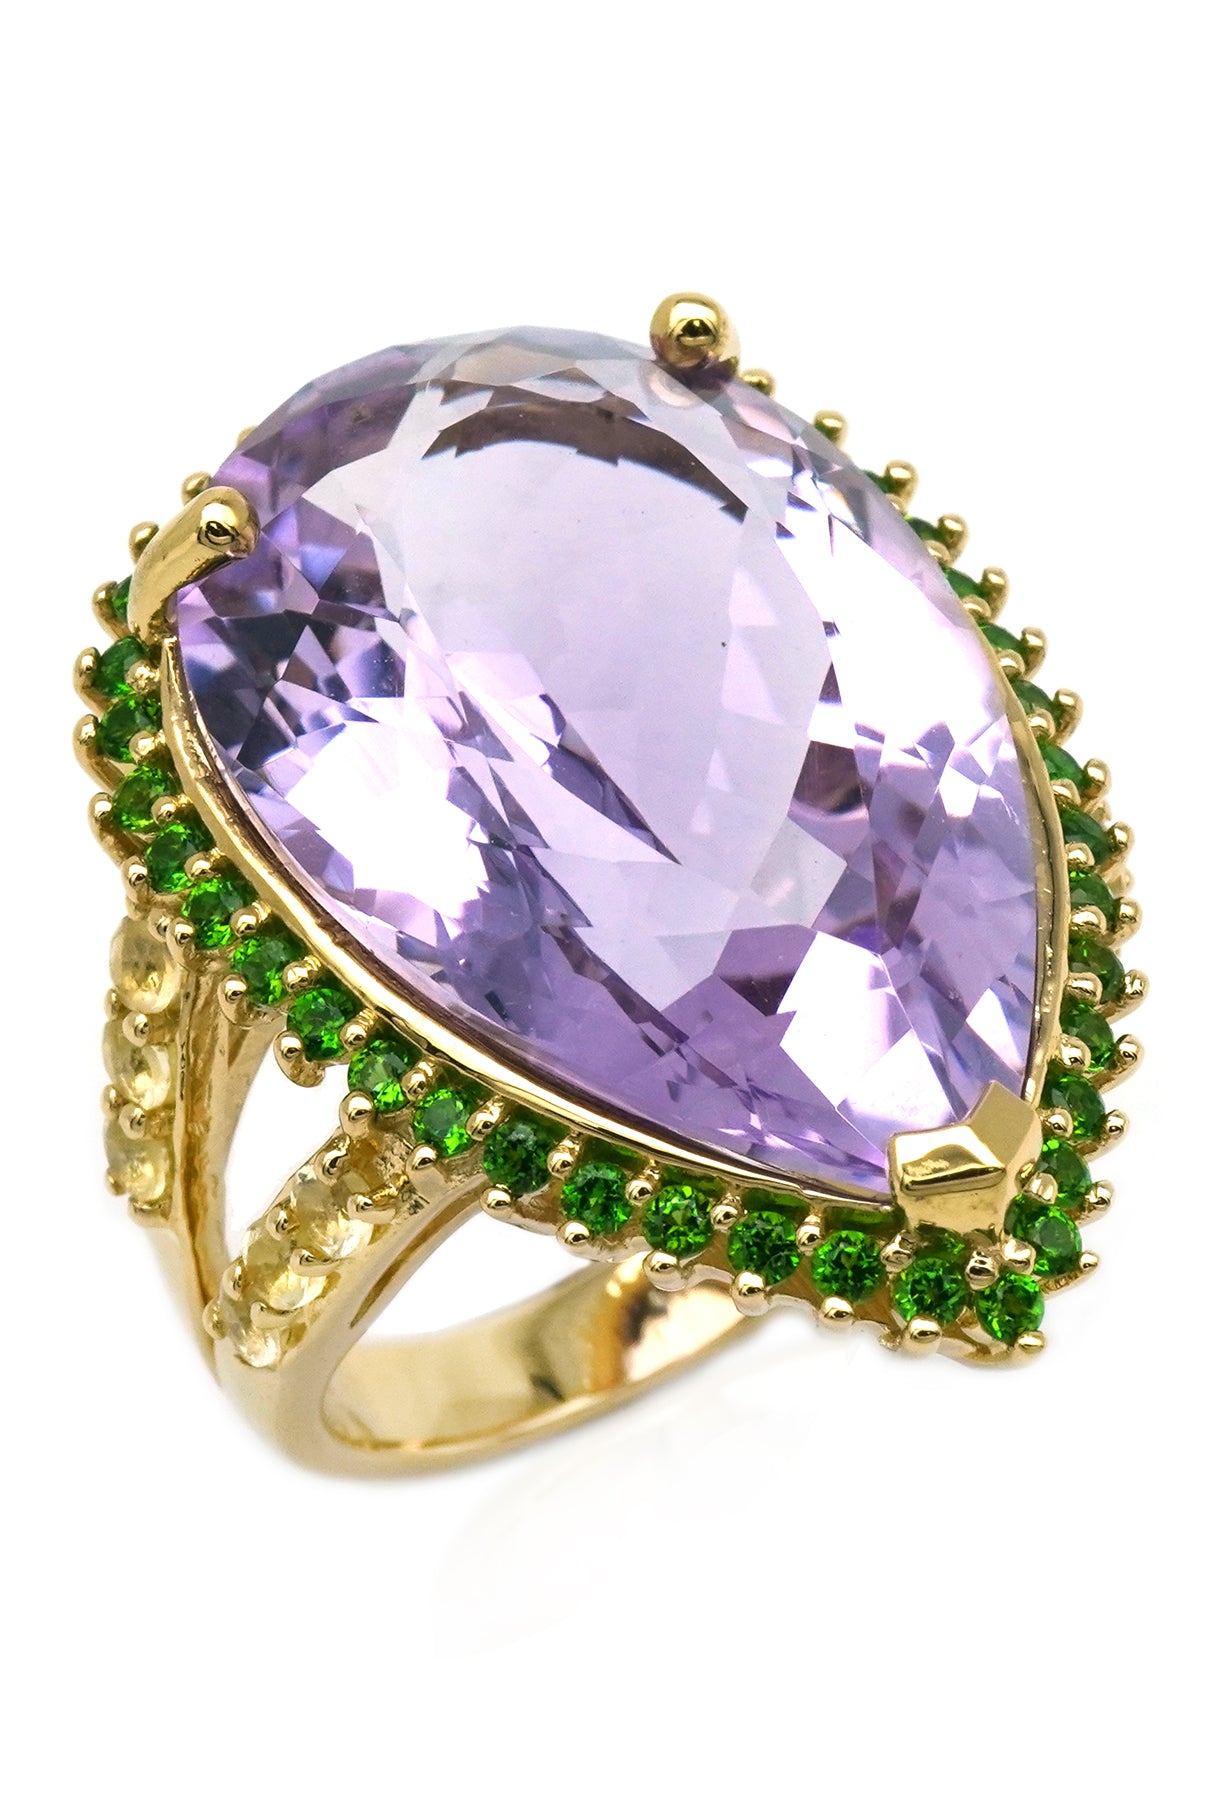 Stunning 19 ct amethyst cocktail ring! International shipping available.